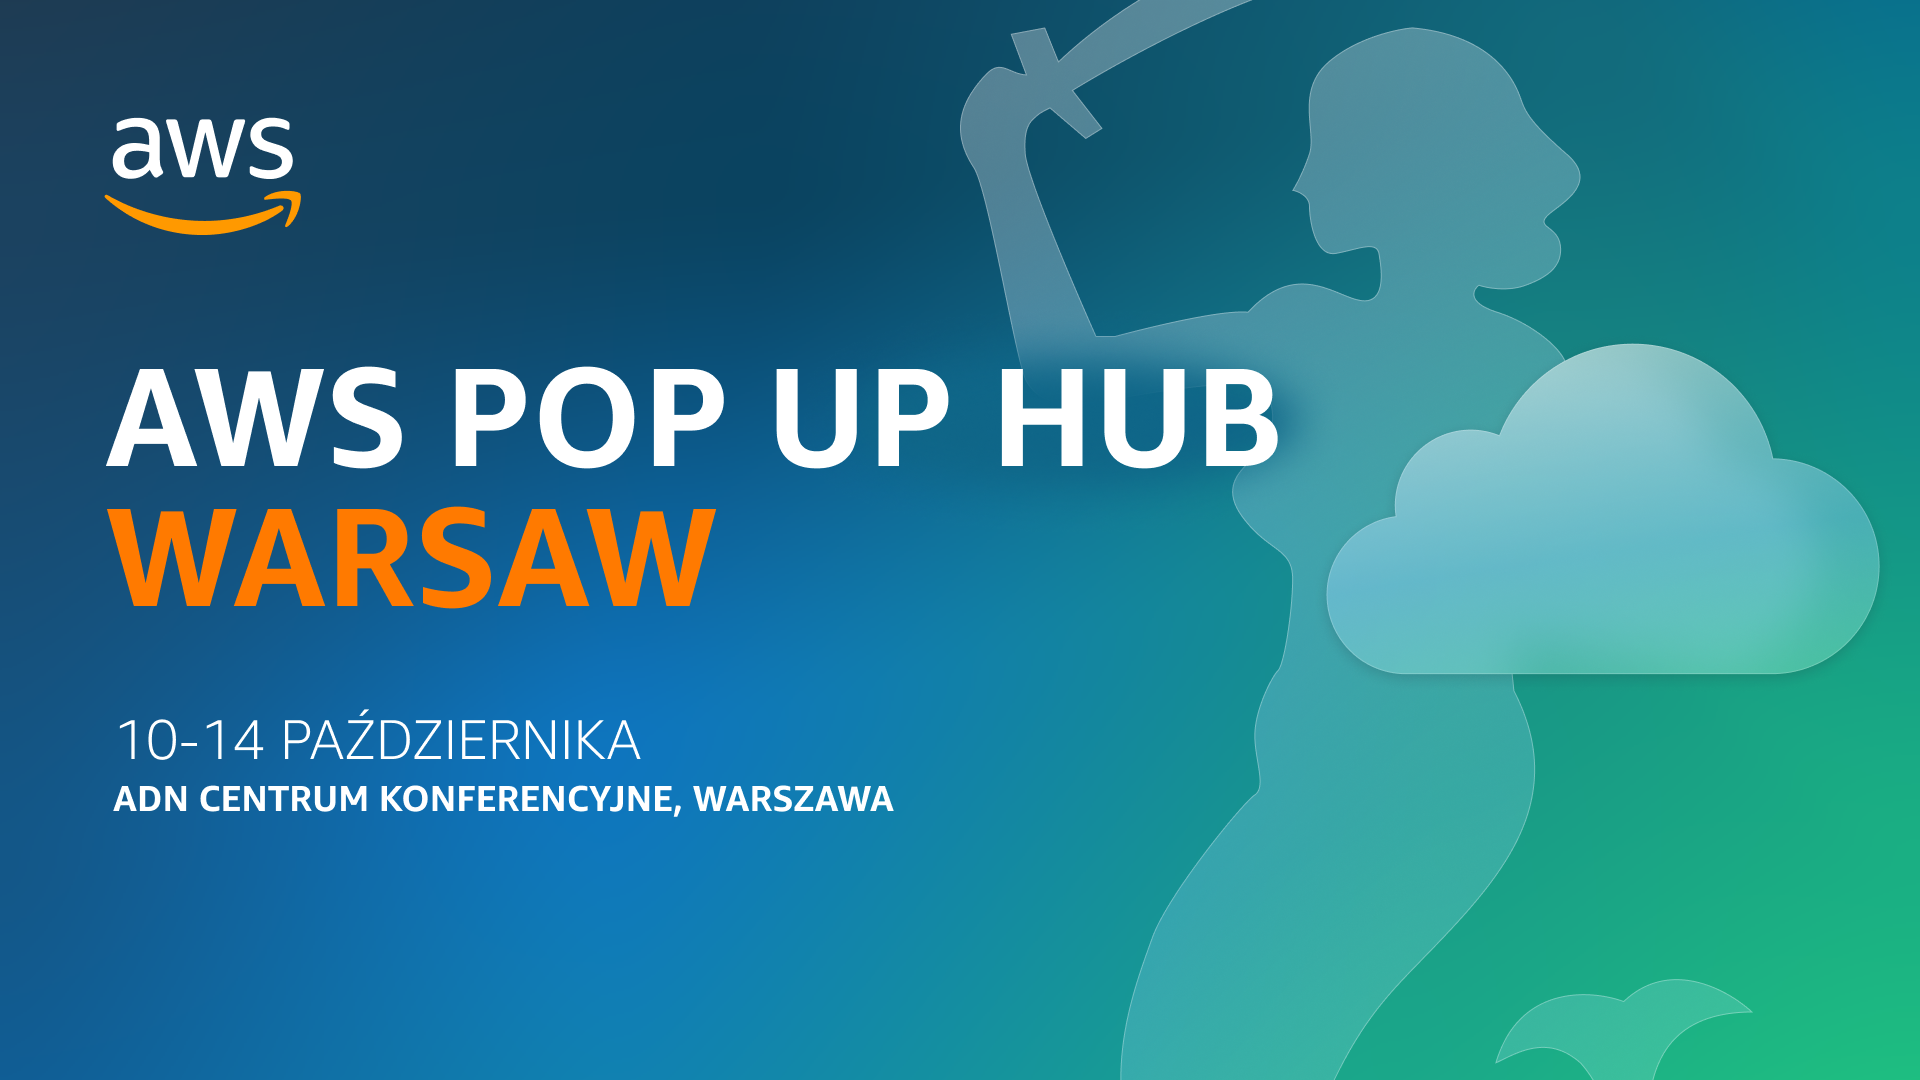 AWS Pop-up Hub in Warsaw, October 10-14th